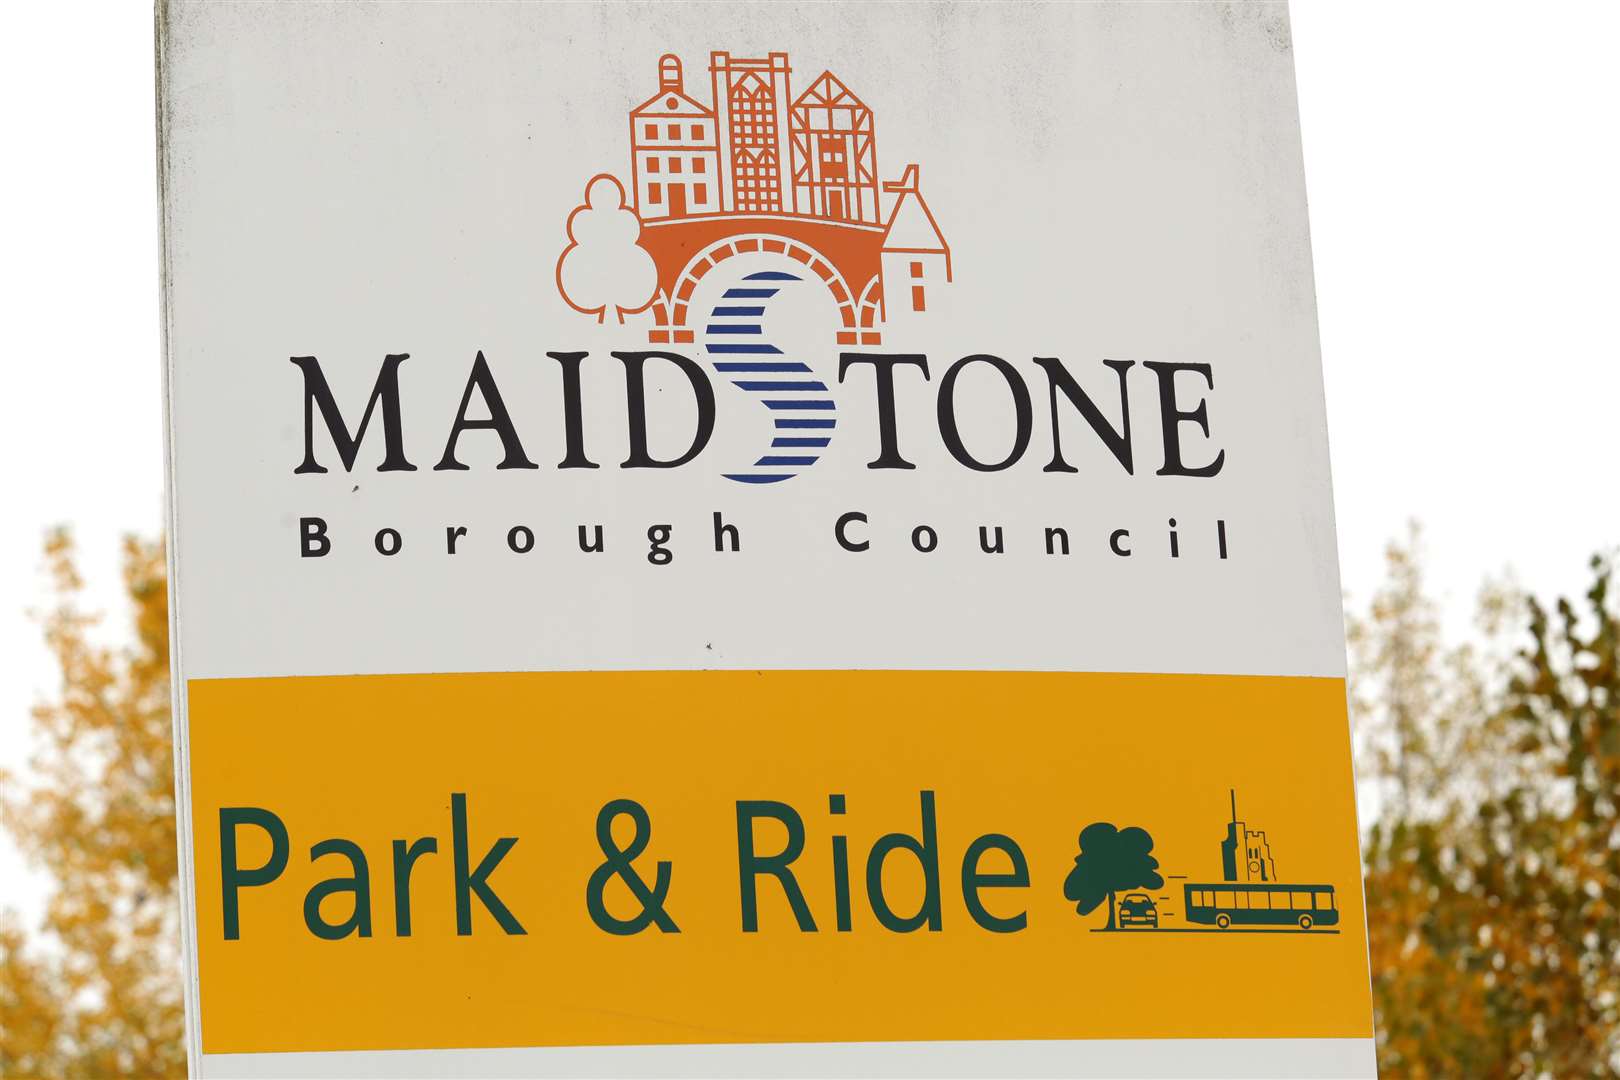 The Park and Ride site at Sittingbourne Road is to close